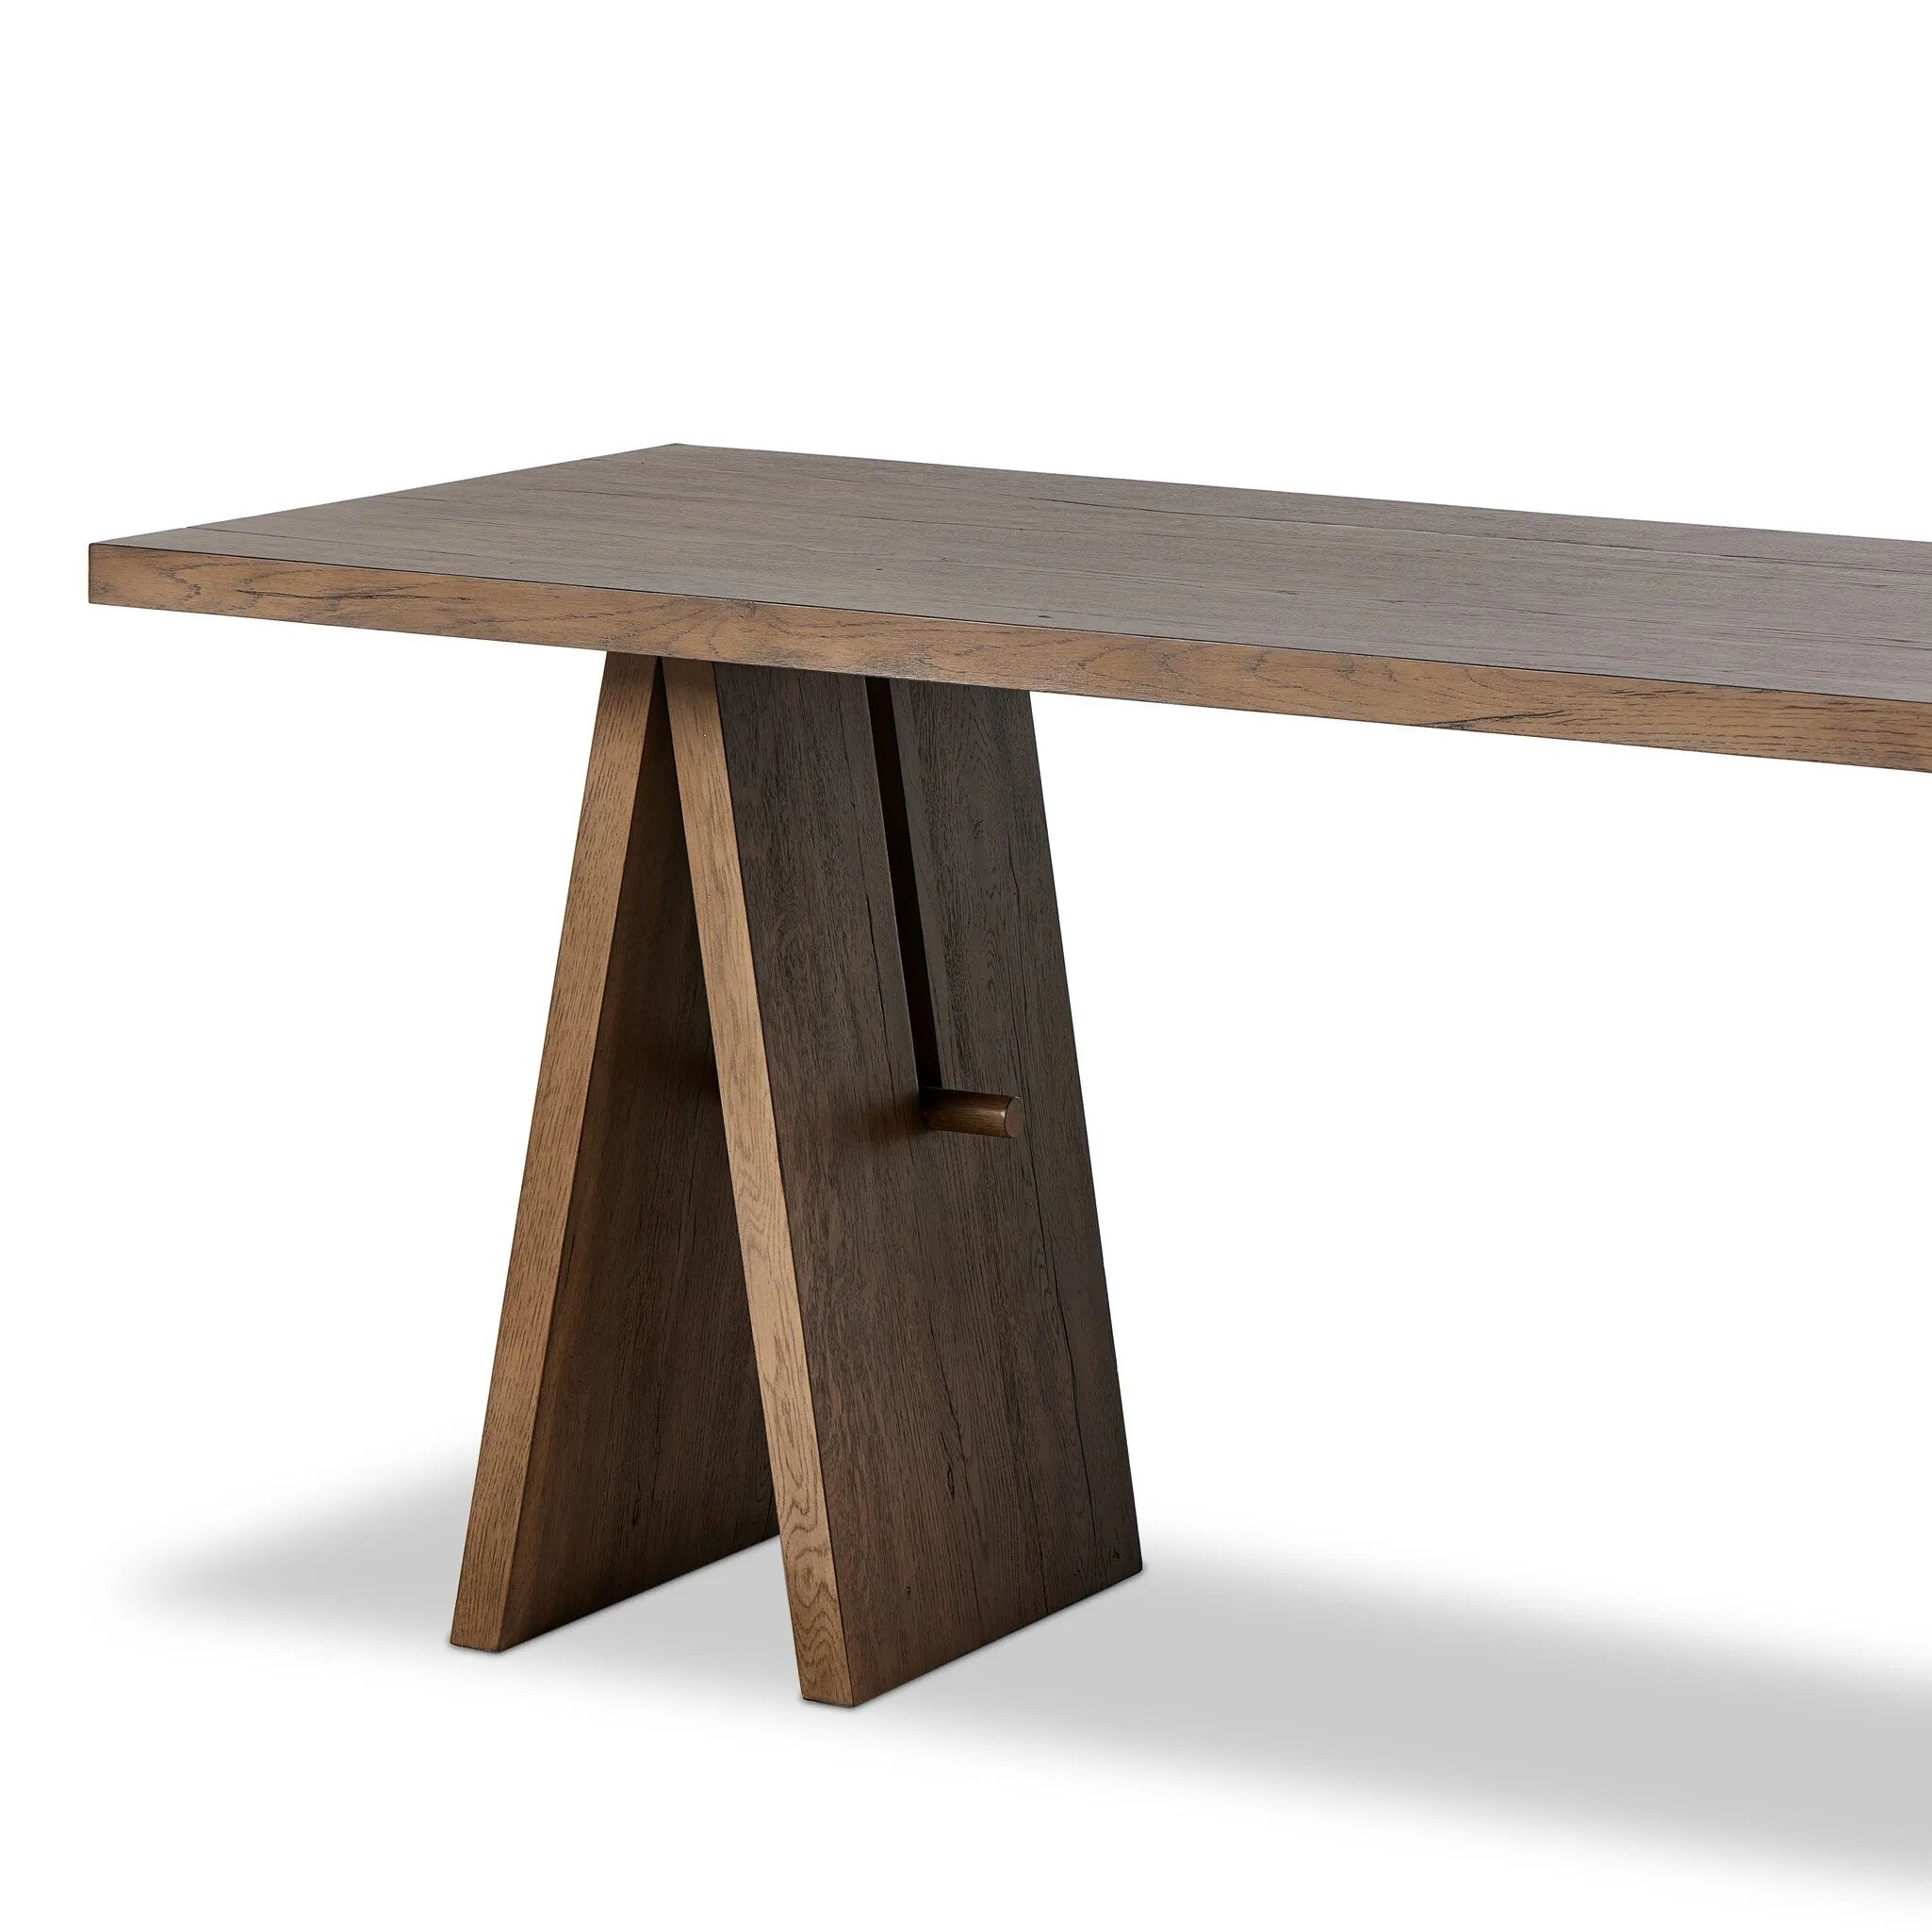 A minimalist frame on this large-scale desk lets the natural character of cracked oak take center stage. Designed with A-frame legs with exposed wood dowel joinery.Collection: Haide Amethyst Home provides interior design, new home construction design consulting, vintage area rugs, and lighting in the Winter Garden metro area.